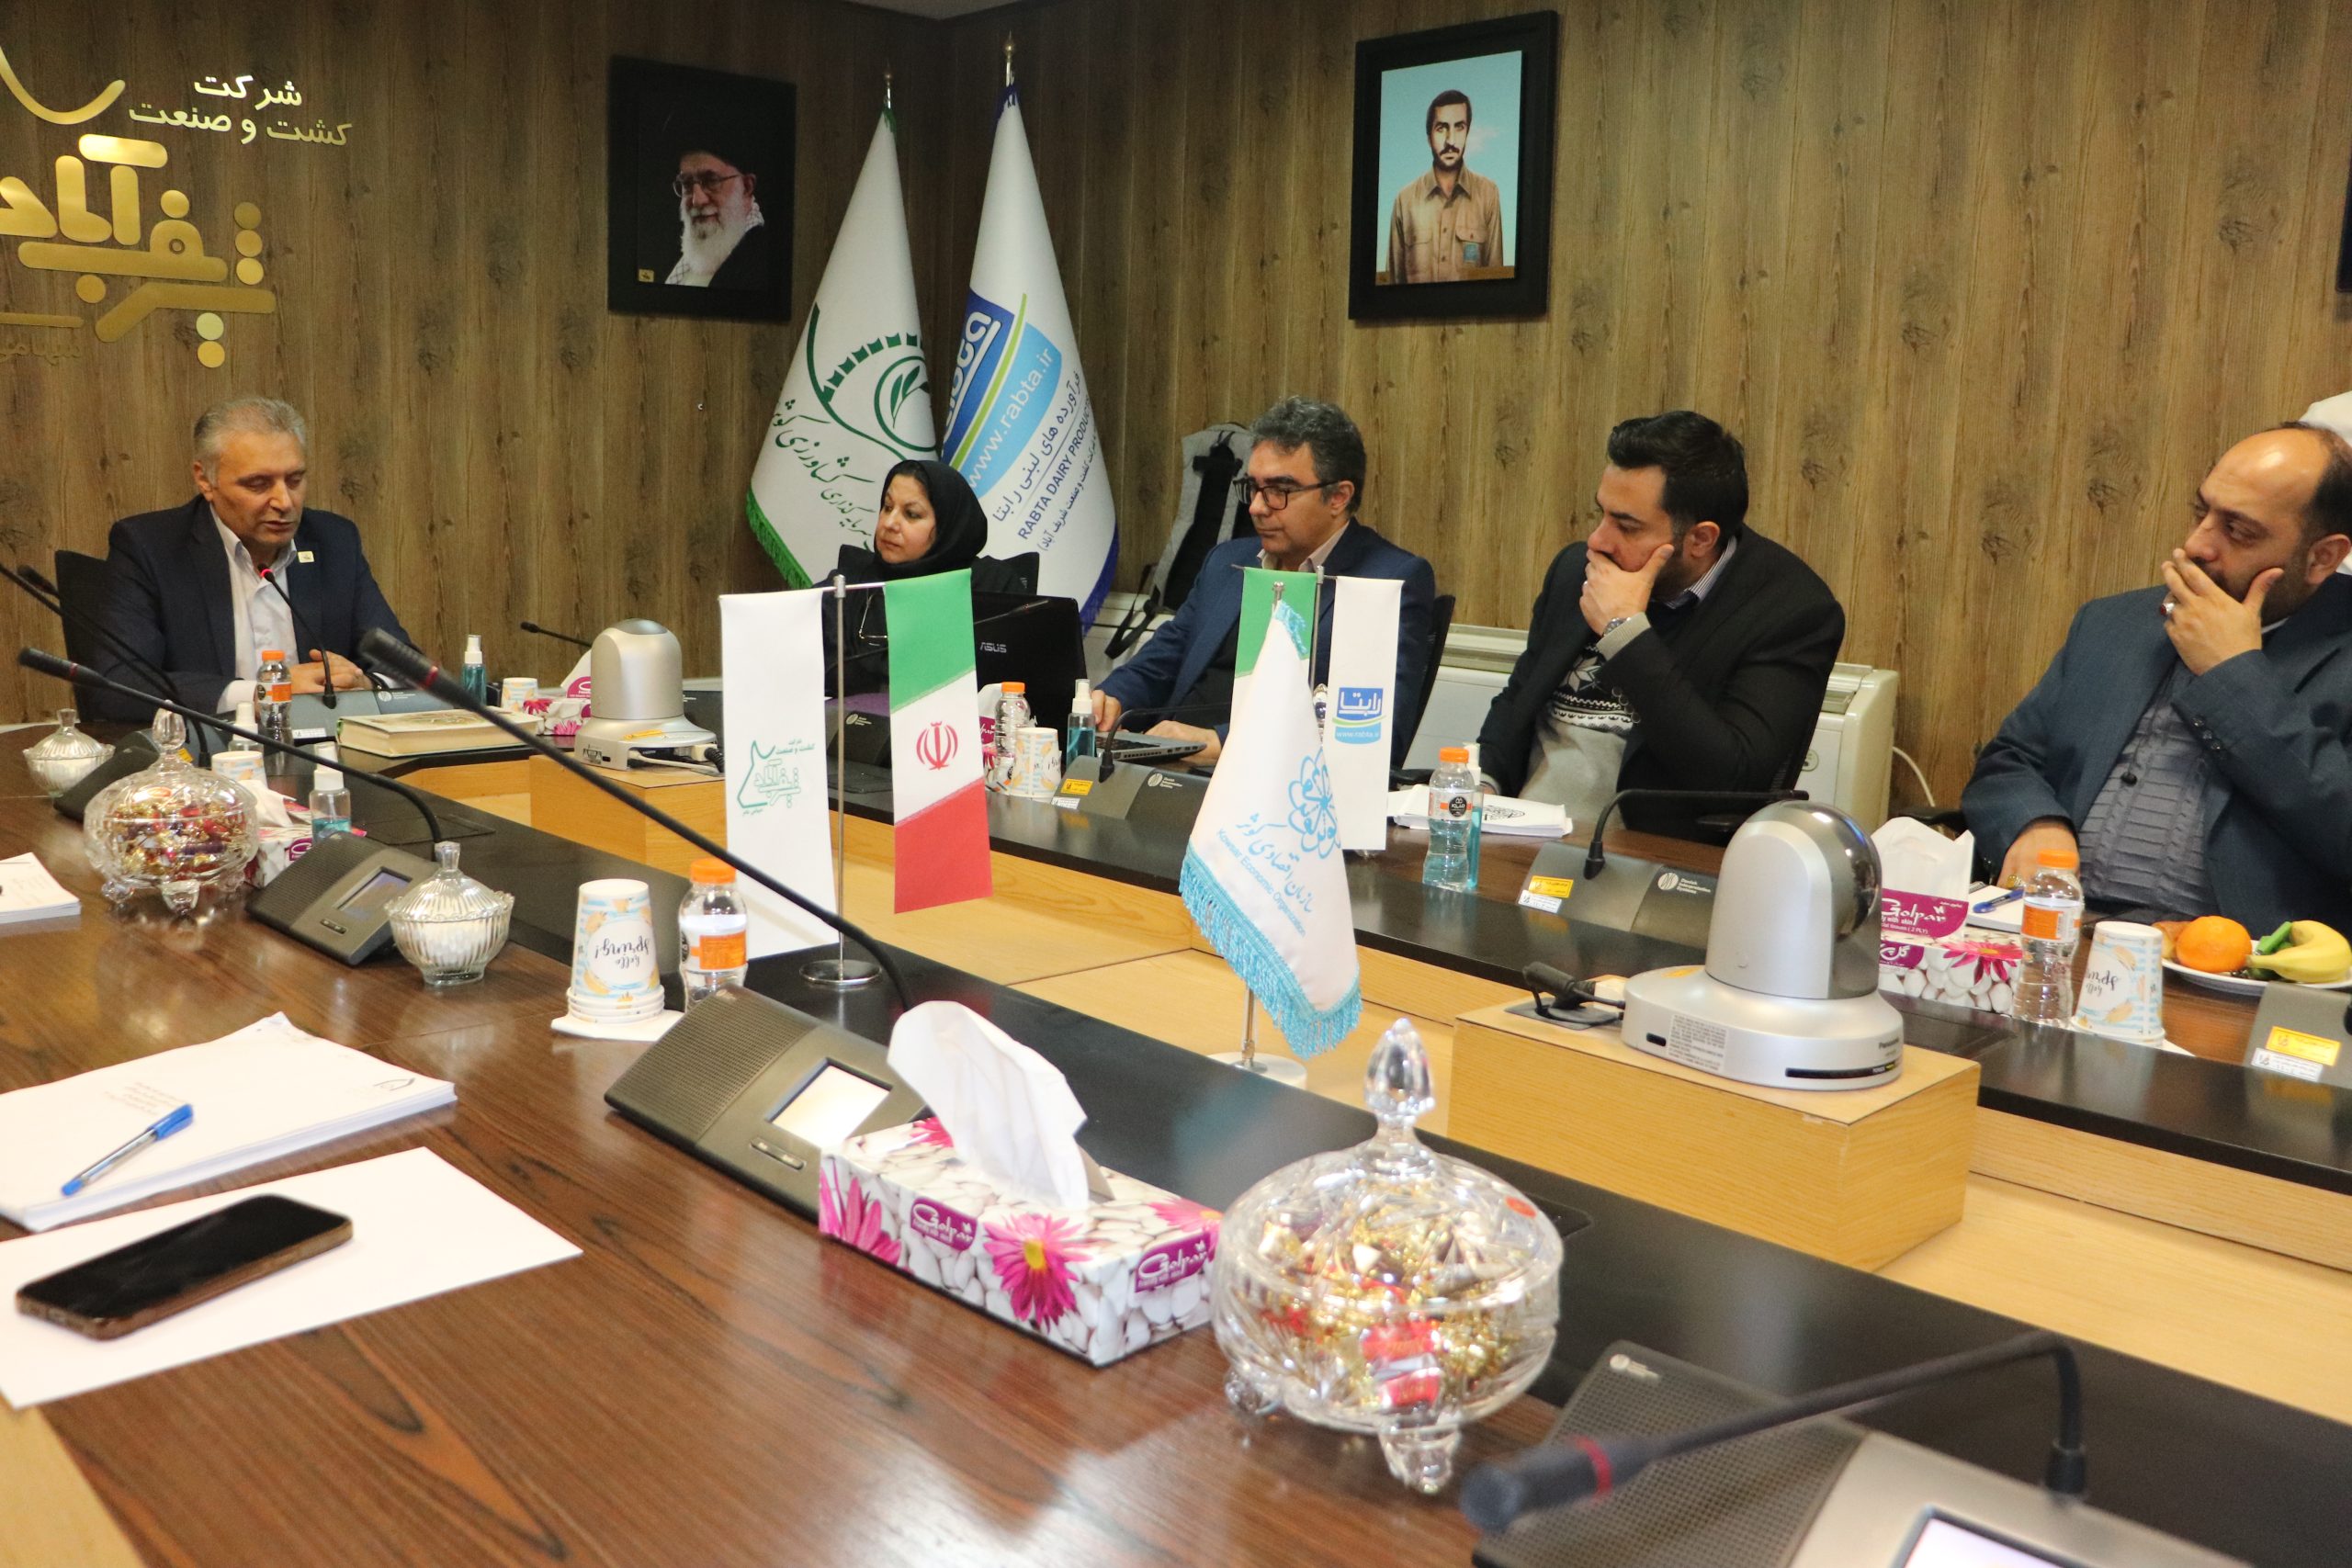 The evaluation process of the National Award for Organizational Excellence in 1402 of Sharifabad Agriculture and Industry Company was carried out